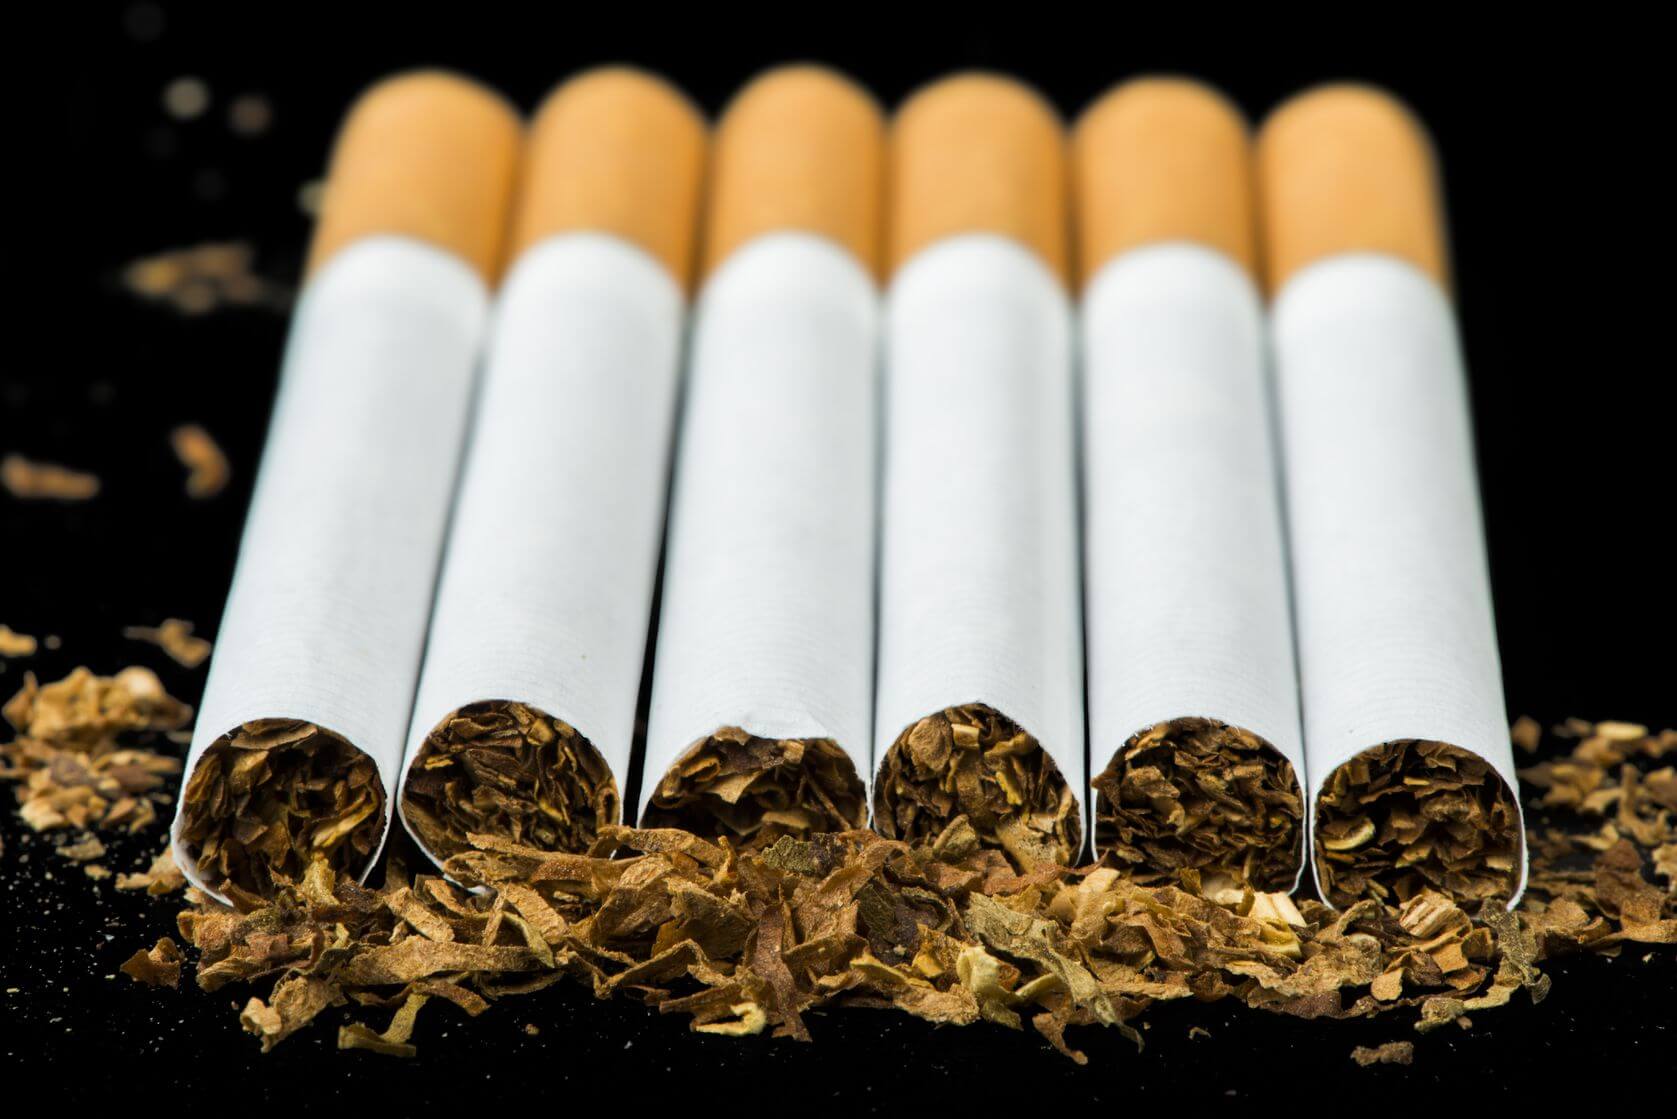 Cigarette Production Up 50% Last Year